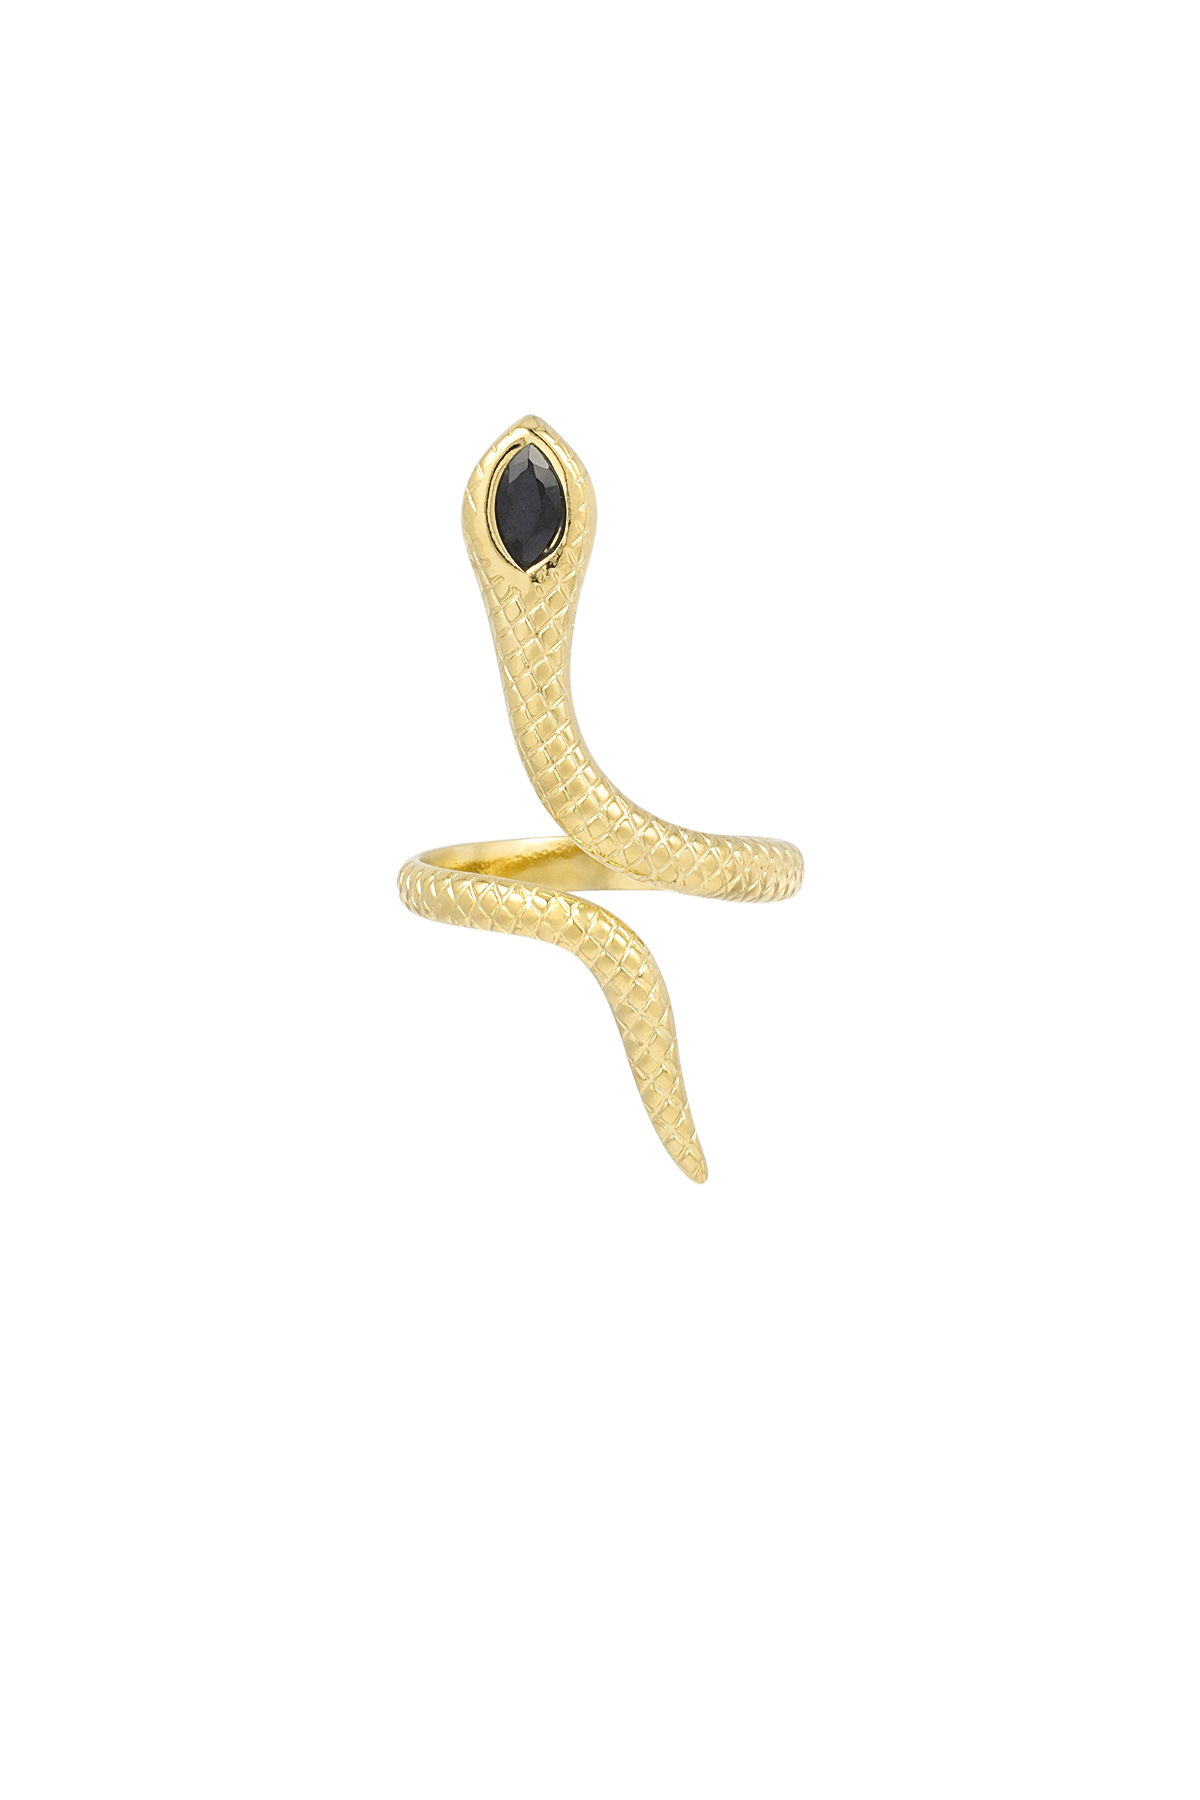 Black snake ring - gold  Picture4